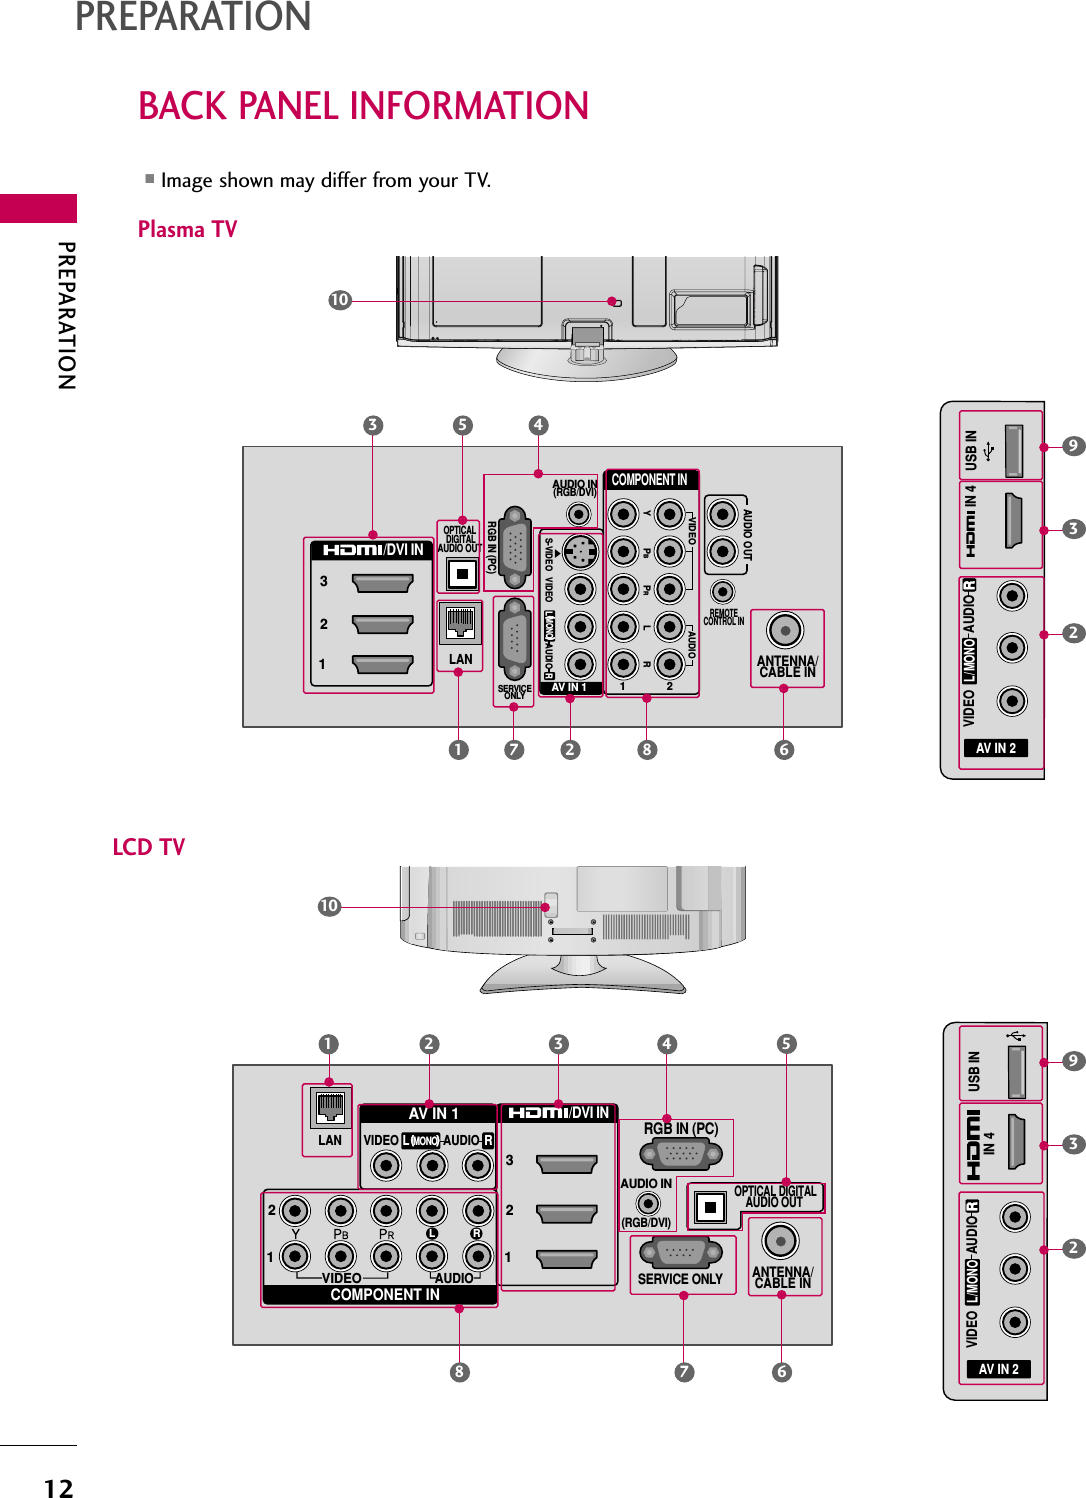 PREPARATION12BACK PANEL INFORMATIONPREPARATION■Image shown may differ from your TV.10VIDEOAUDIOL RSERVICE ONLYAUDIO IN(RGB/DVI)OPTICAL DIGITALAUDIO OUT ANTENNA/CABLE INRGB IN (PC)AV IN 1COMPONENT IN23121MONO( )AUDIOVIDEOLAN/DVI INLR2 37 68AV IN 2L/MONORAUDIOVIDEOUSB ININ 42935101213/DVI INCOMPONENT INANTENNA/CABLE INOPTICALDIGITALAUDIO OUT RGB IN (PC)LANSERVICEONLYAUDIO IN(RGB/DVI)AUDIO OUTREMOTECONTROL INVIDEOAUDIO12LYPBPRRAUDIOVIDEOS-VIDEOMONO( )L RAV IN 13681 7 2AV IN 2L/MONORAUDIOVIDEOUSB ININ 4293Plasma TV LCD TV5 44